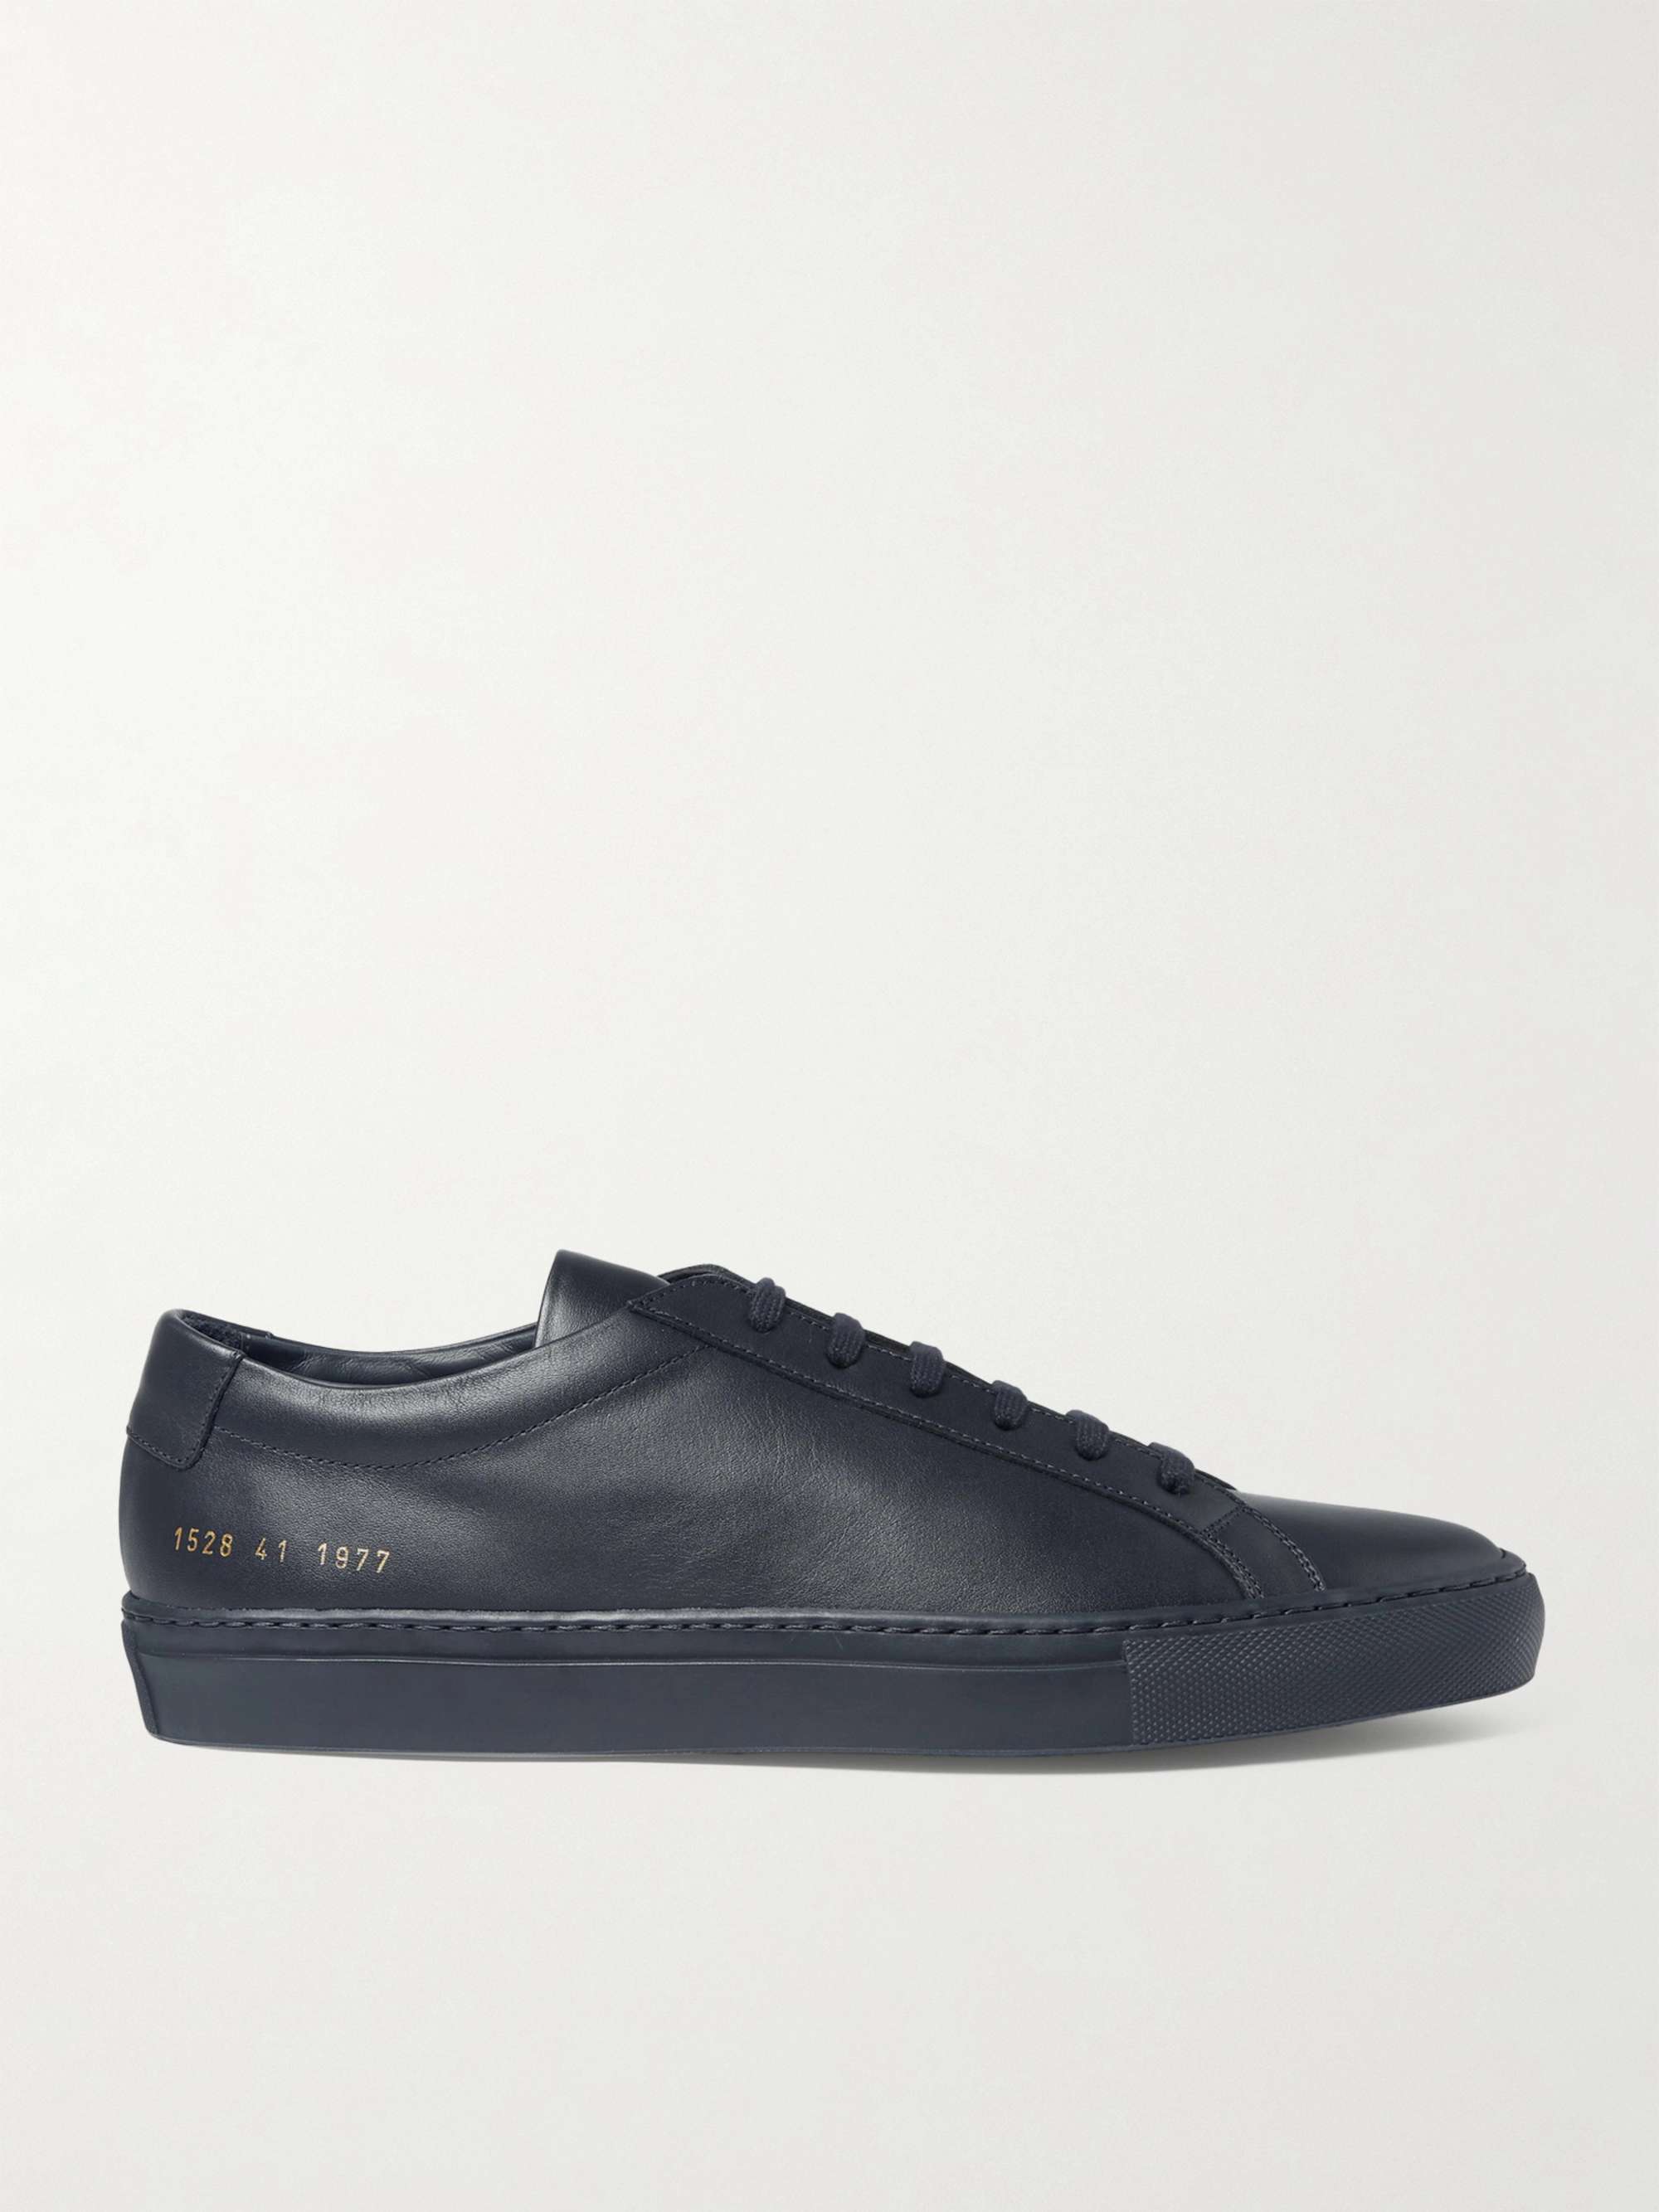 COMMON PROJECTS Original Achilles Leather Sneakers | MR PORTER